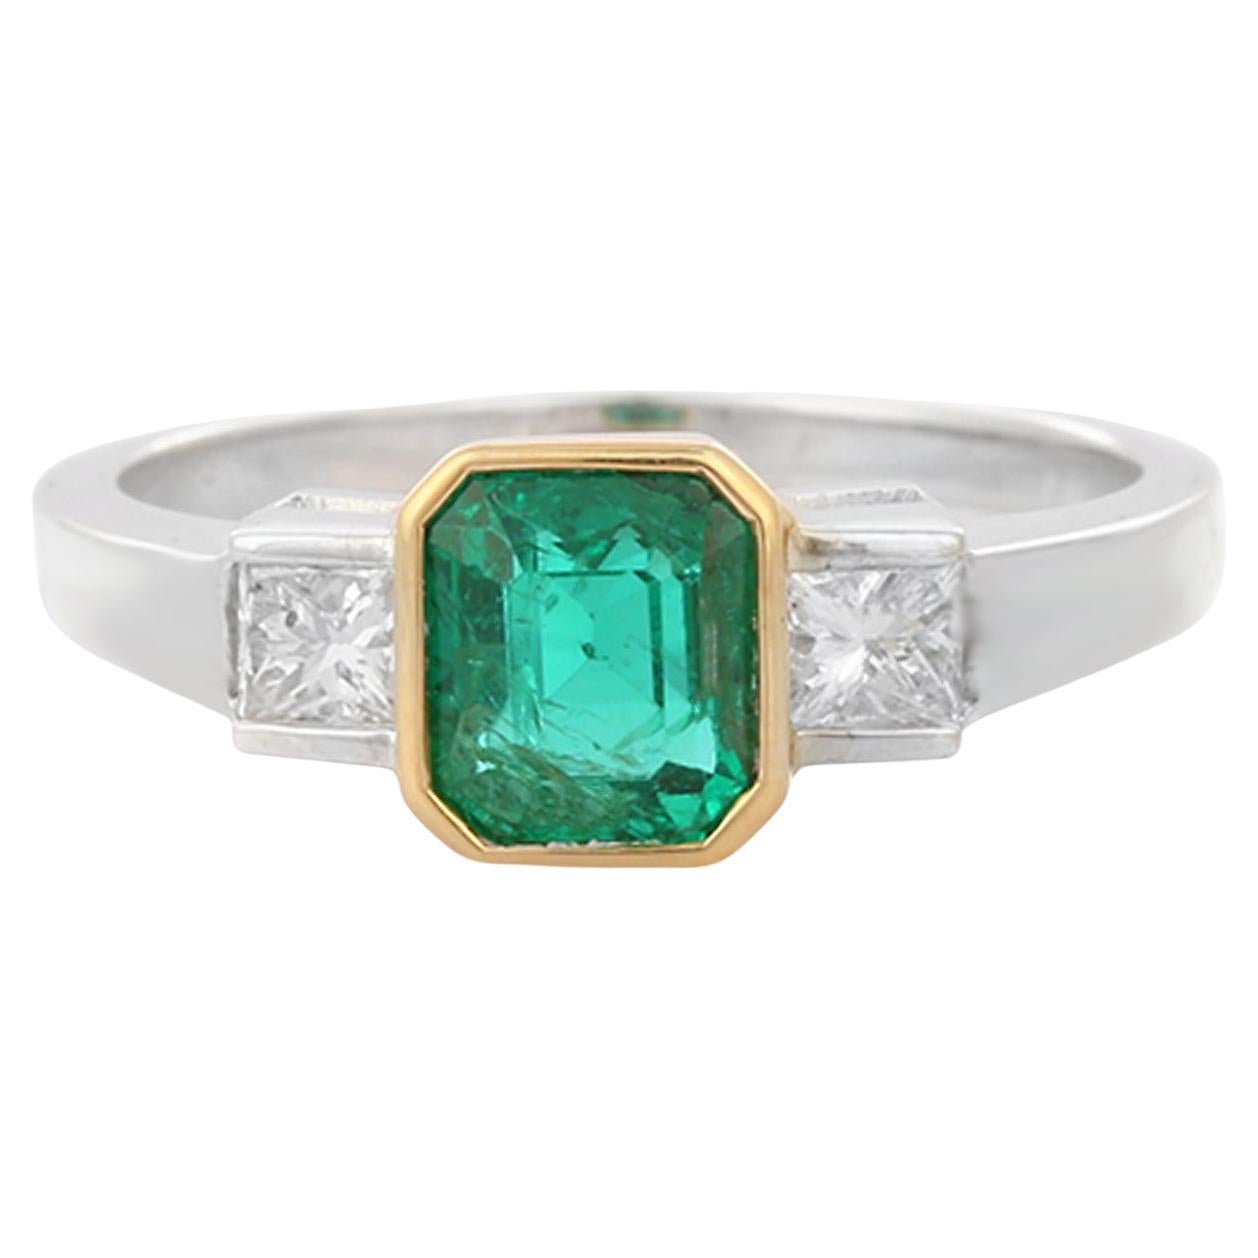 For Sale:  1.61 Carat Octagon Cut Emerald and Diamond Three Stone Ring in 18K White Gold